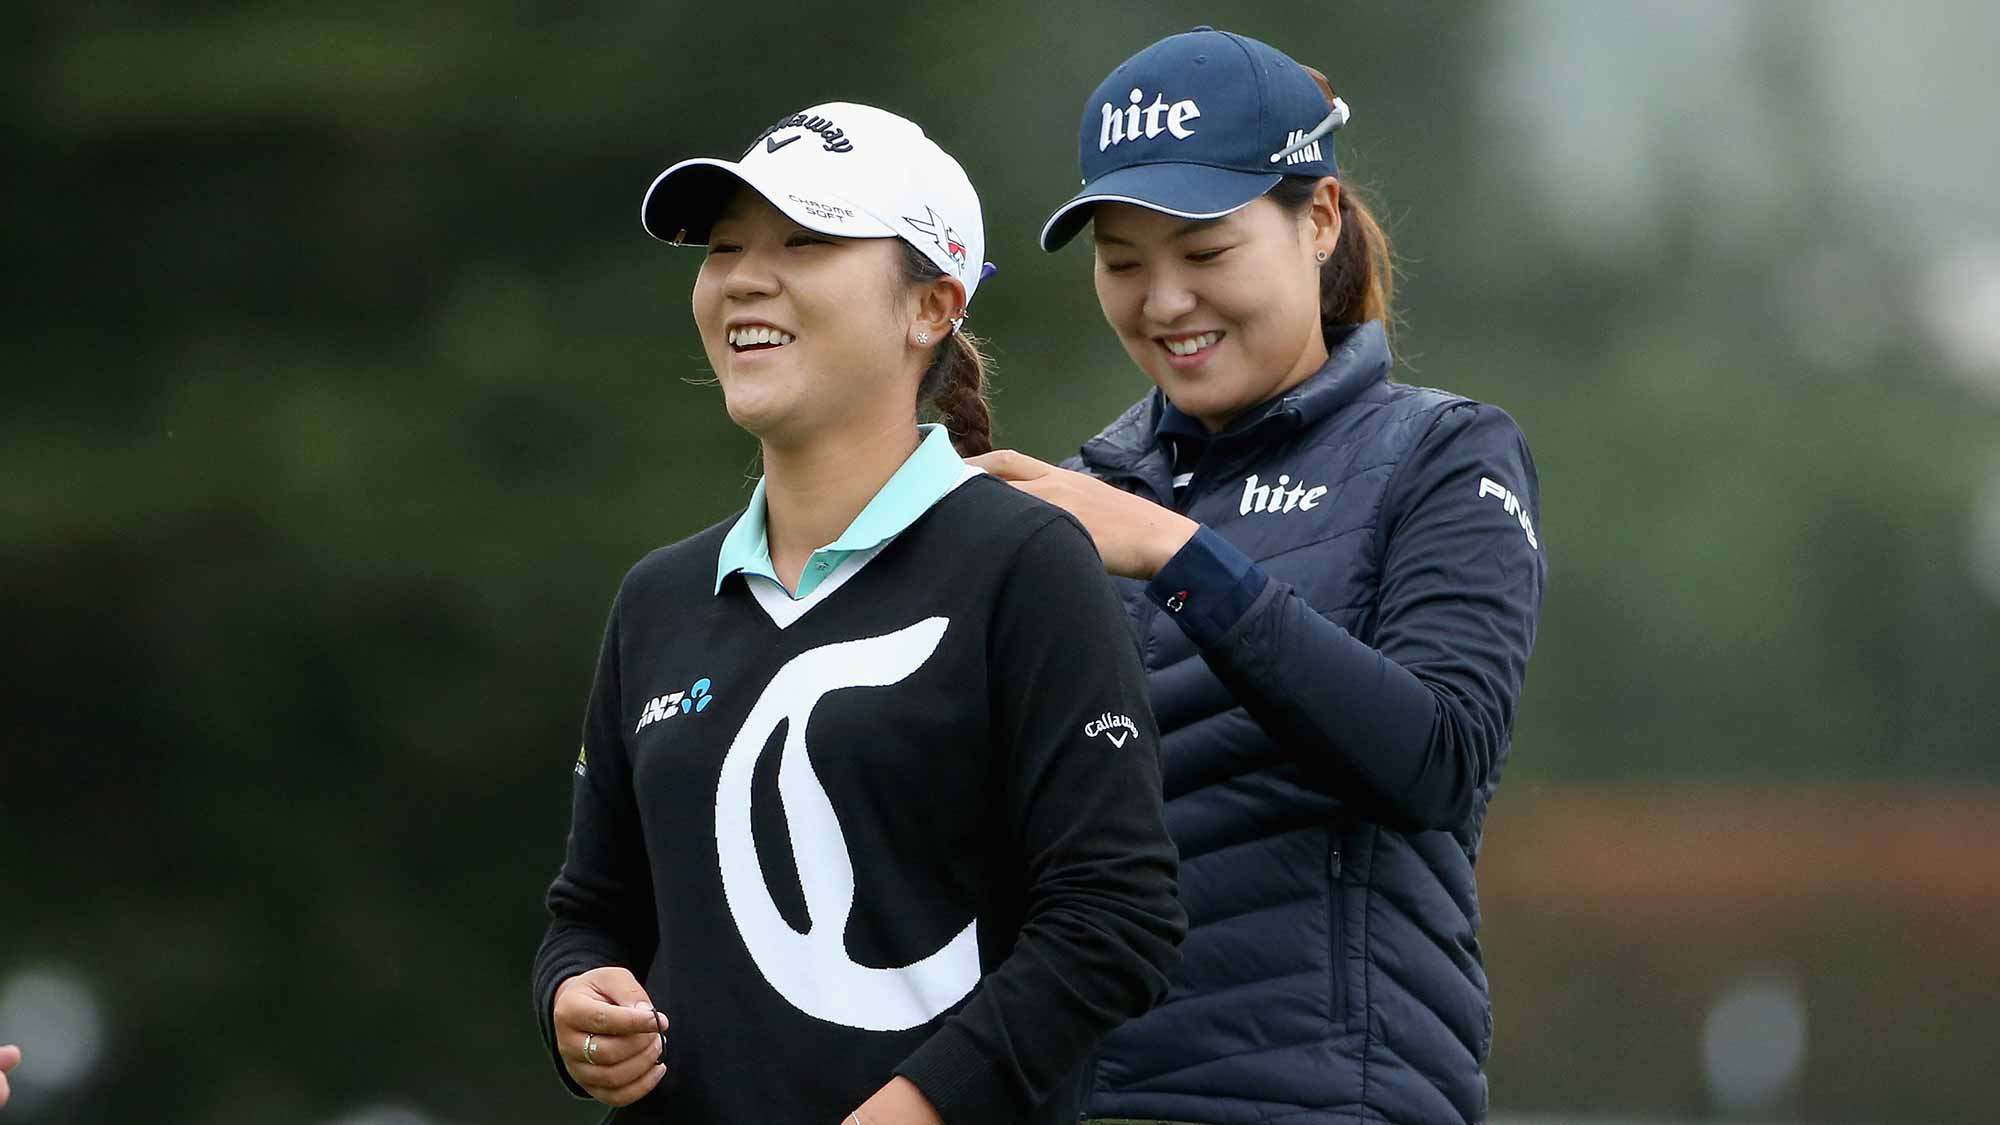 In Gee Chun of South Korea braids the hair of Lydia Ko of New Zealand on the 10th hole green during round one of the Swinging Skirts LPGA Classic at Lake Merced Golf Club